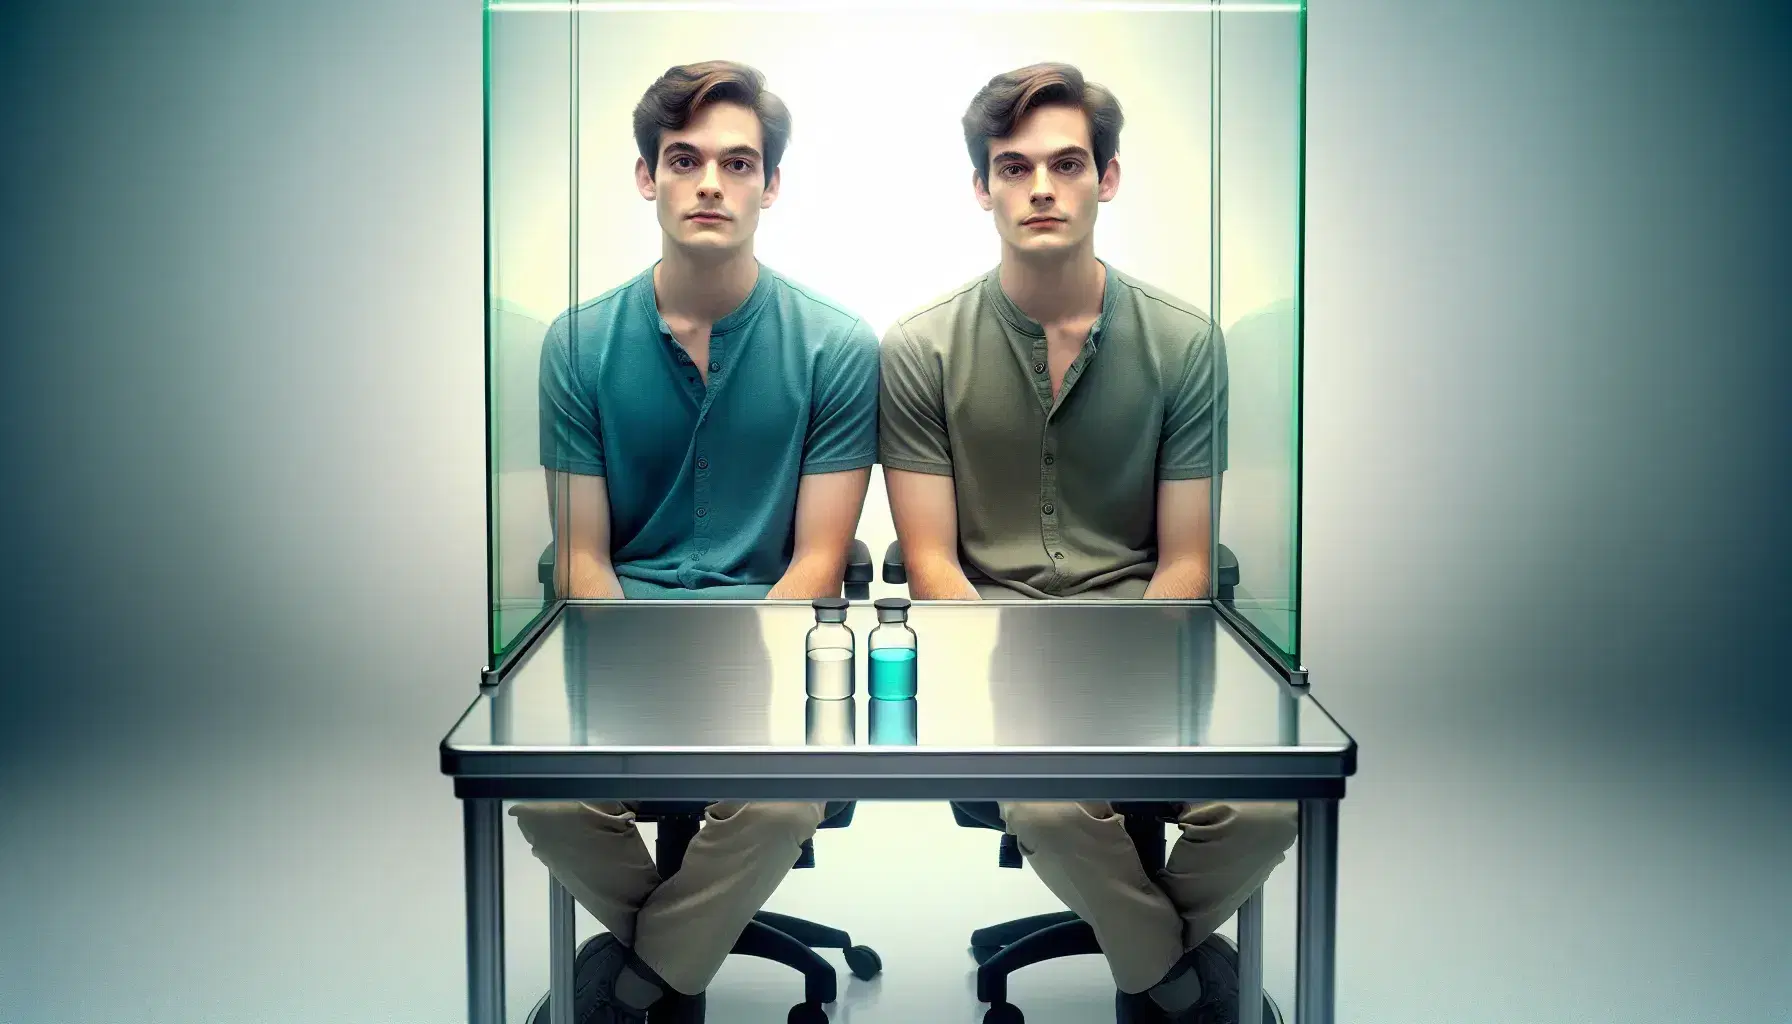 Identical twins sitting in clinical setting with glass partition and beakers on table, reflecting genetic studies and scientific research.